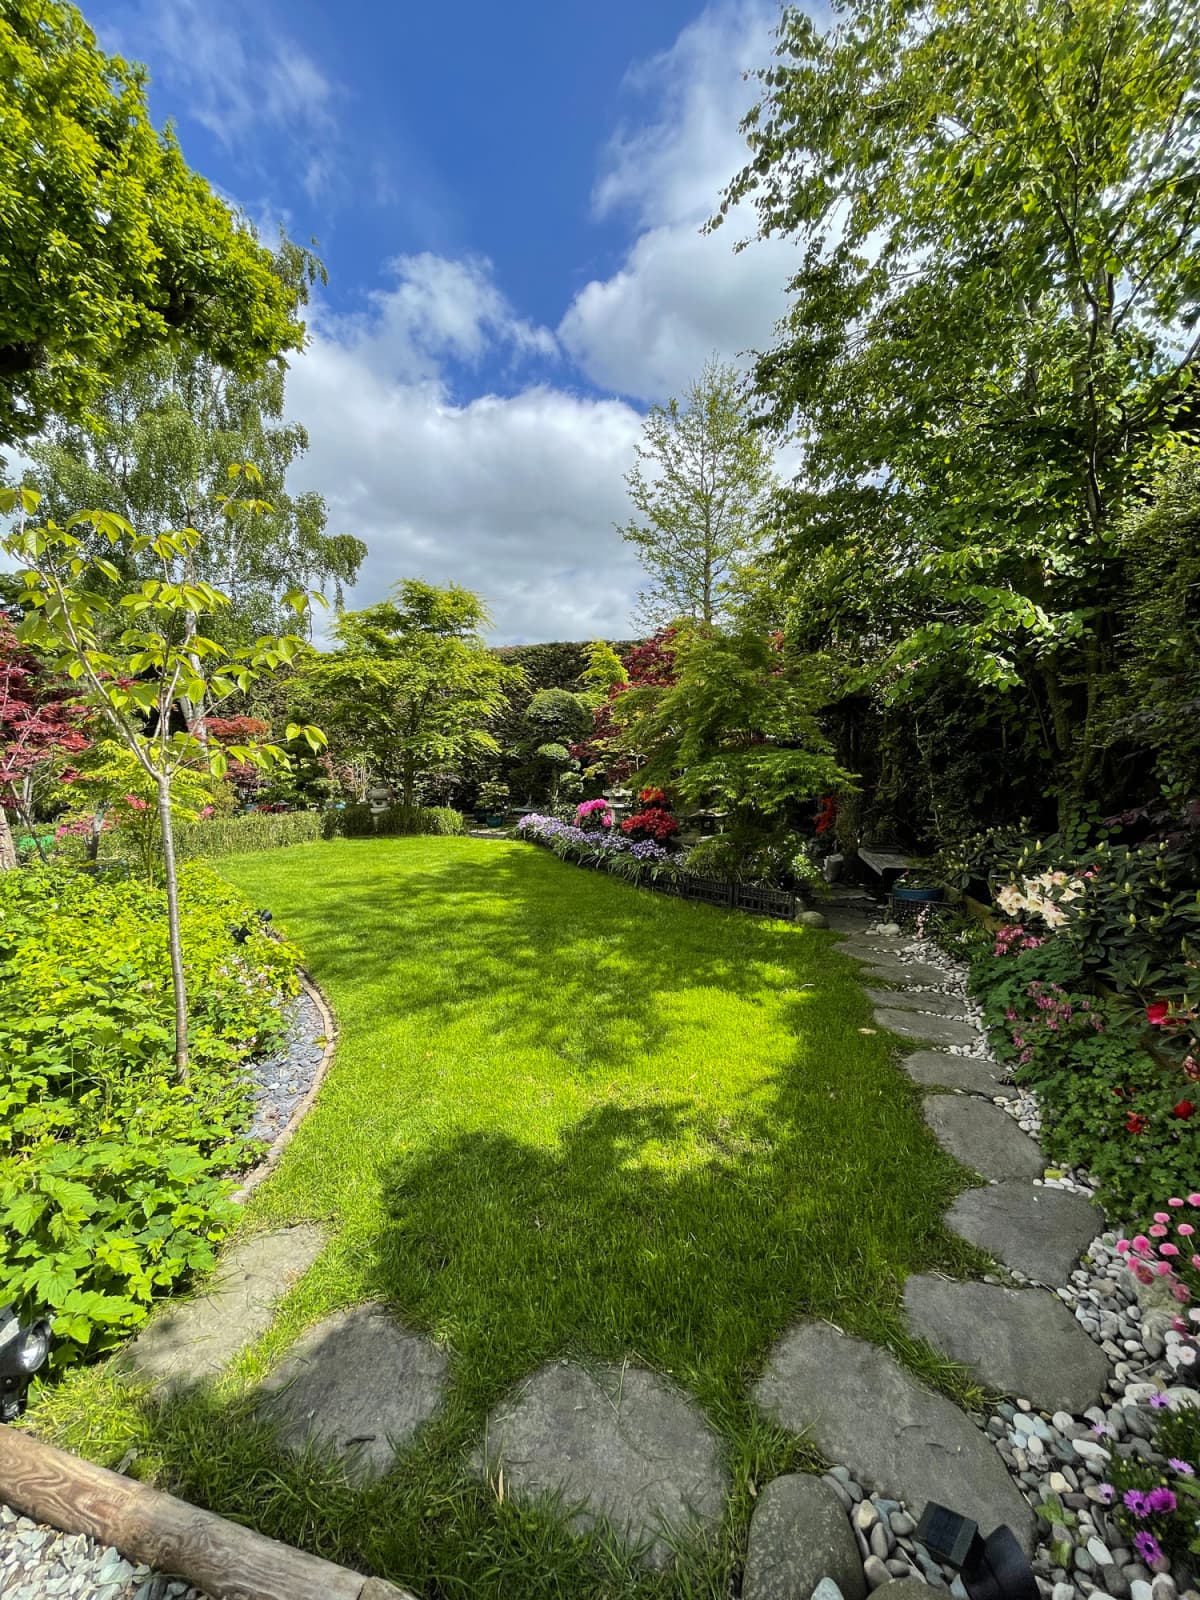 Japanese style garden with potted flowering azalea shrubs besides a stepping stone garden path